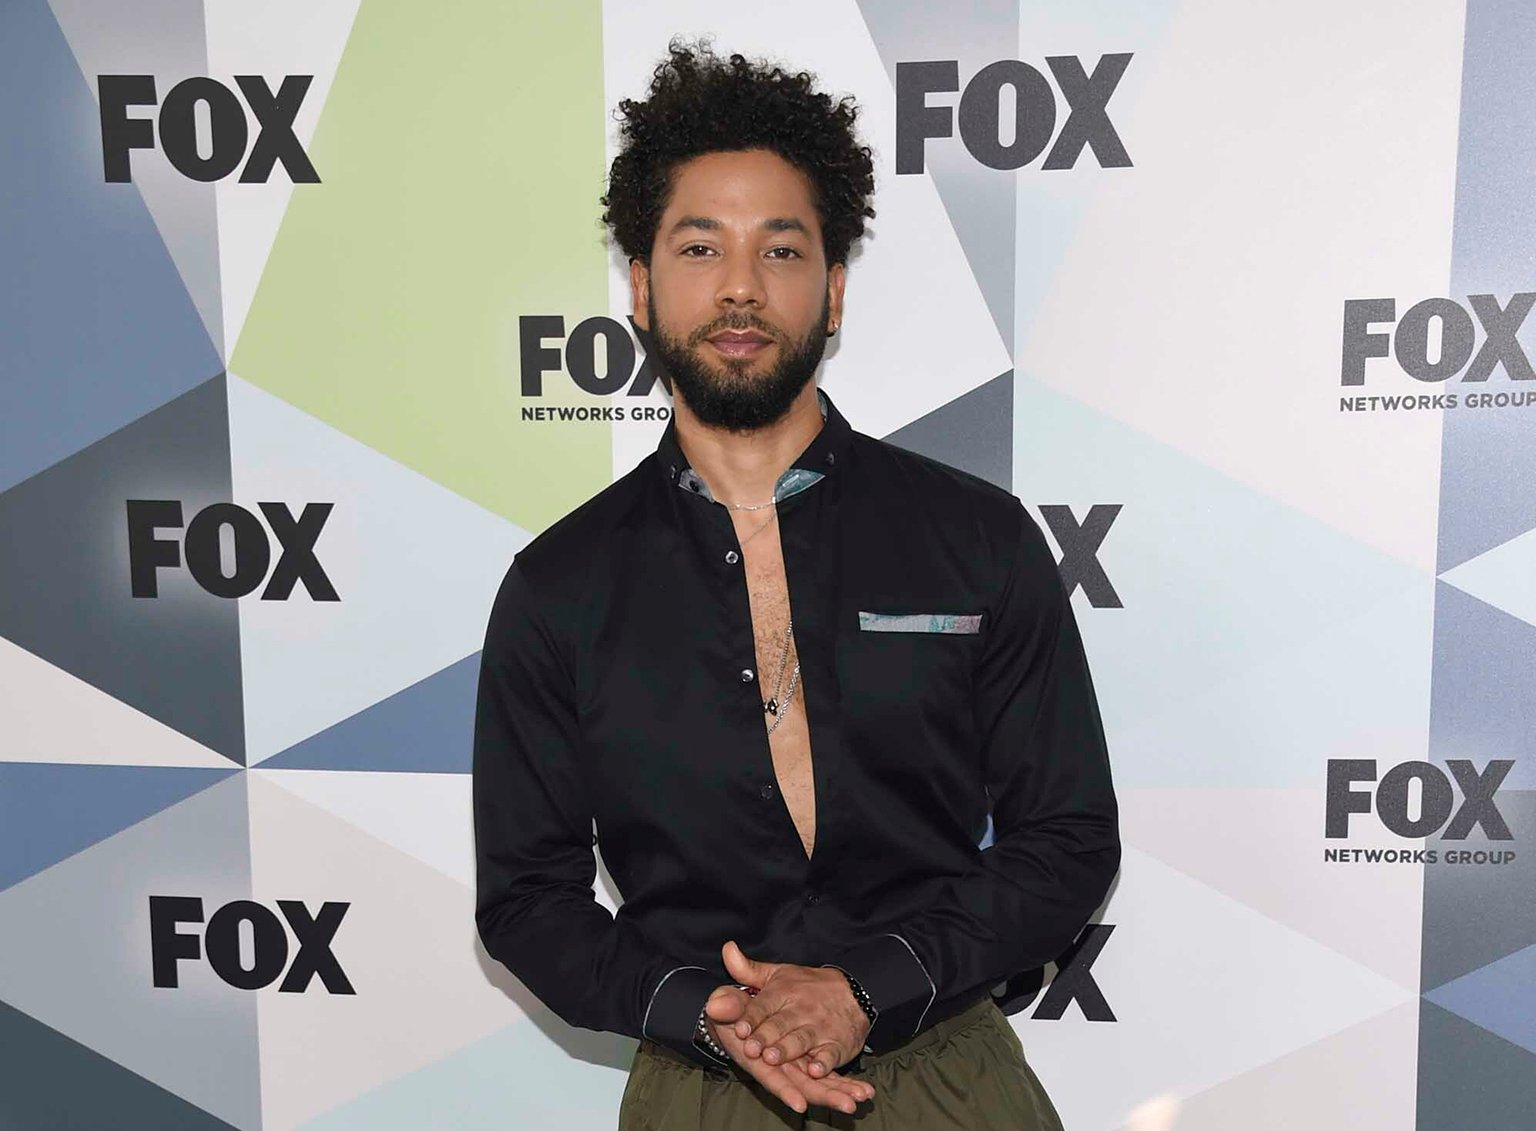 In this May 14, 2018 file photo, Jussie Smollett, a cast member in the TV series “Empire,” attends the Fox Networks Group 2018 programming presentation after-party in New York. (Photo by Evan Agostini / Invision / AP, File)